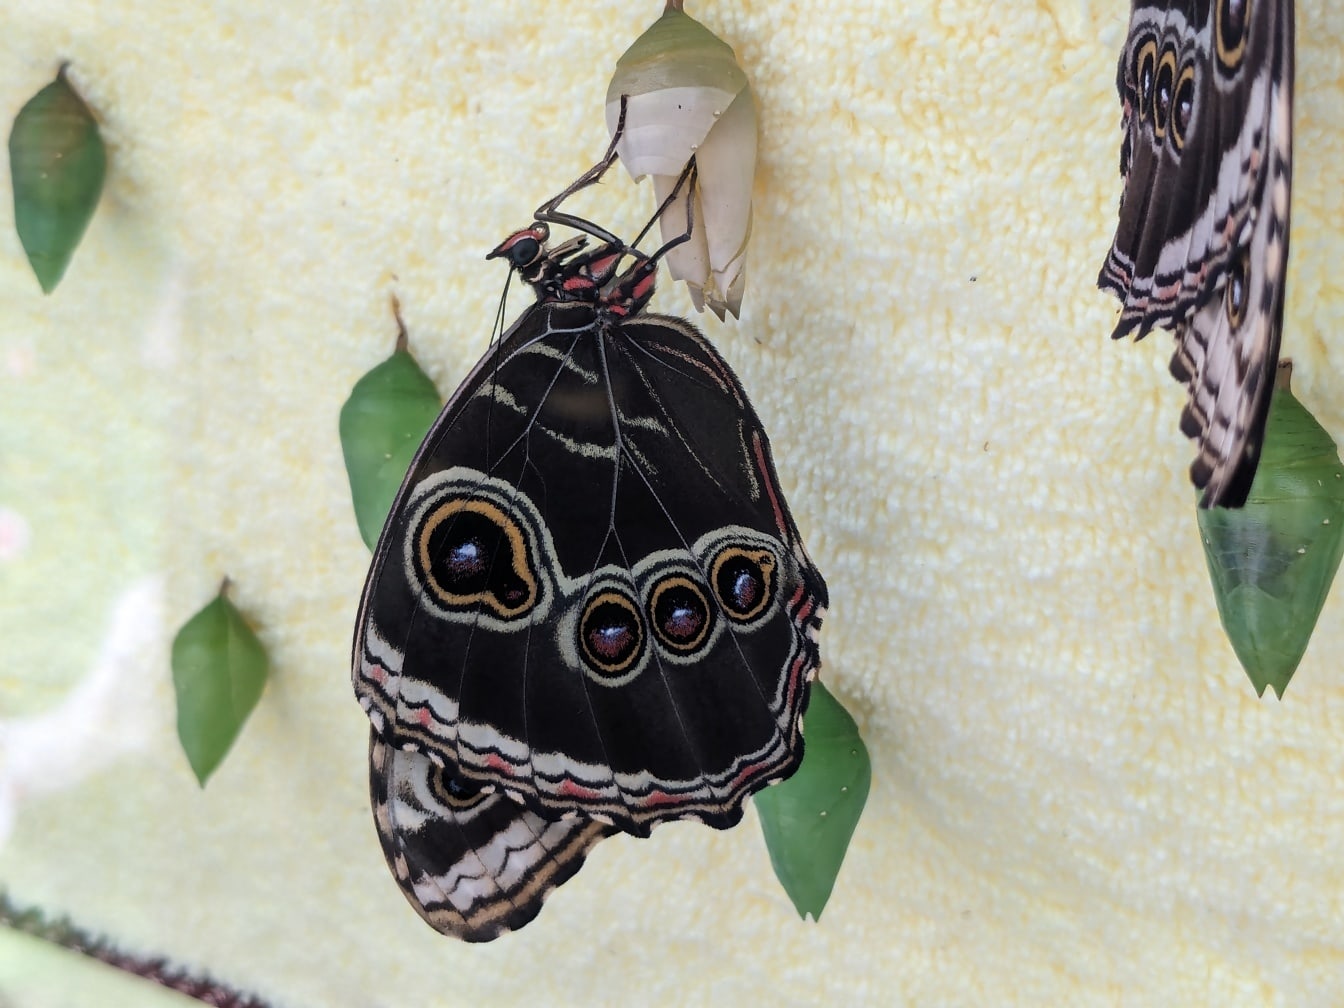 Black morpho butterfly on a white surface